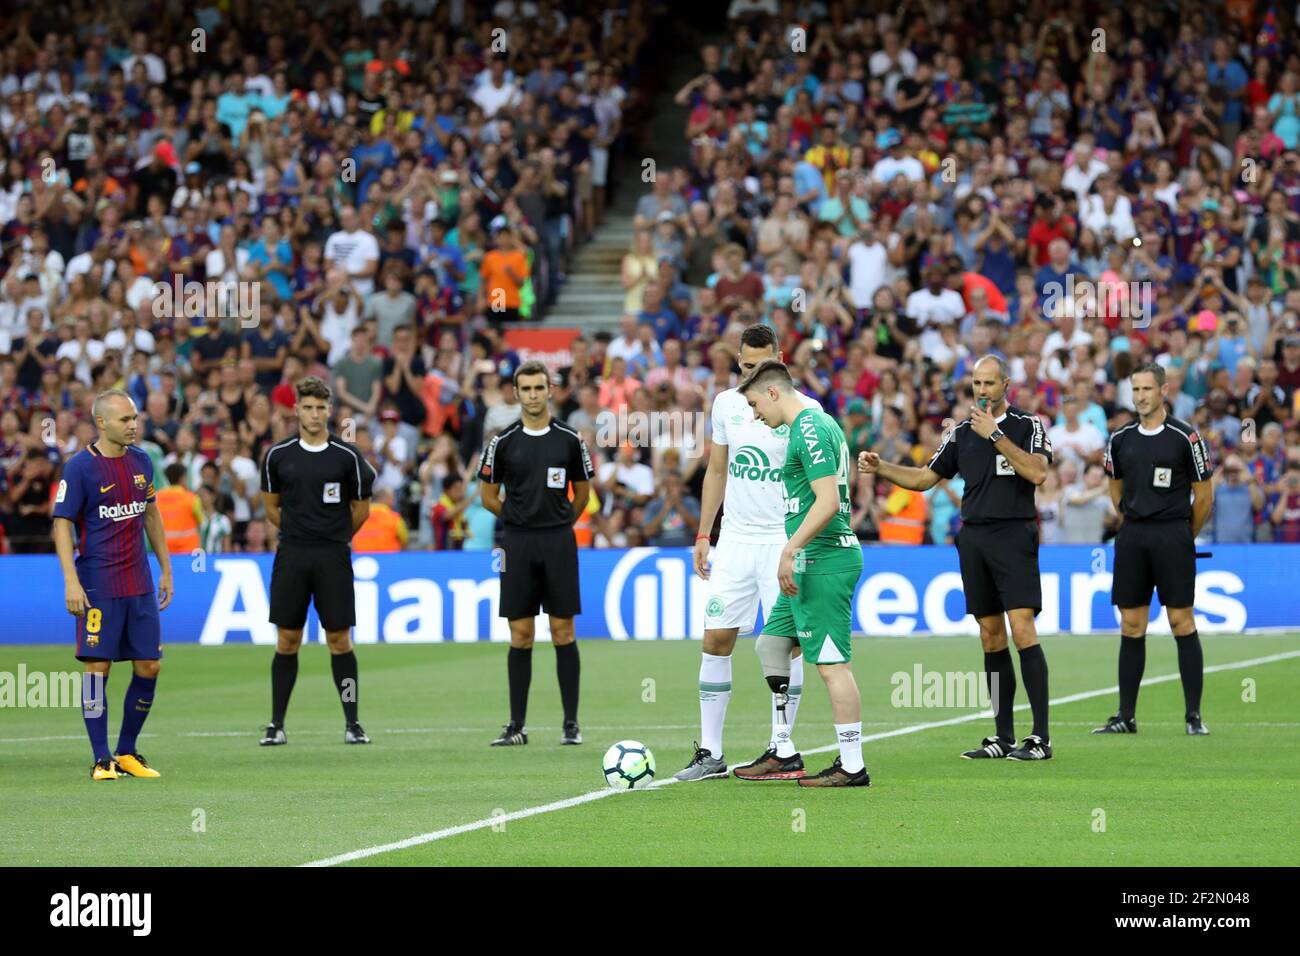 Plane crash survivors Jakson Follmann with prosthetic leg and Neto of Chapecoense give the kick off ahead of the 2017 Joan Gamper Trophy football match between FC Barcelona and Chapecoense on August 7, 2017 at Camp Nou stadium in Barcelona, Spain - Photo Manuel Blondeau / AOP Press / DPPI Stock Photo